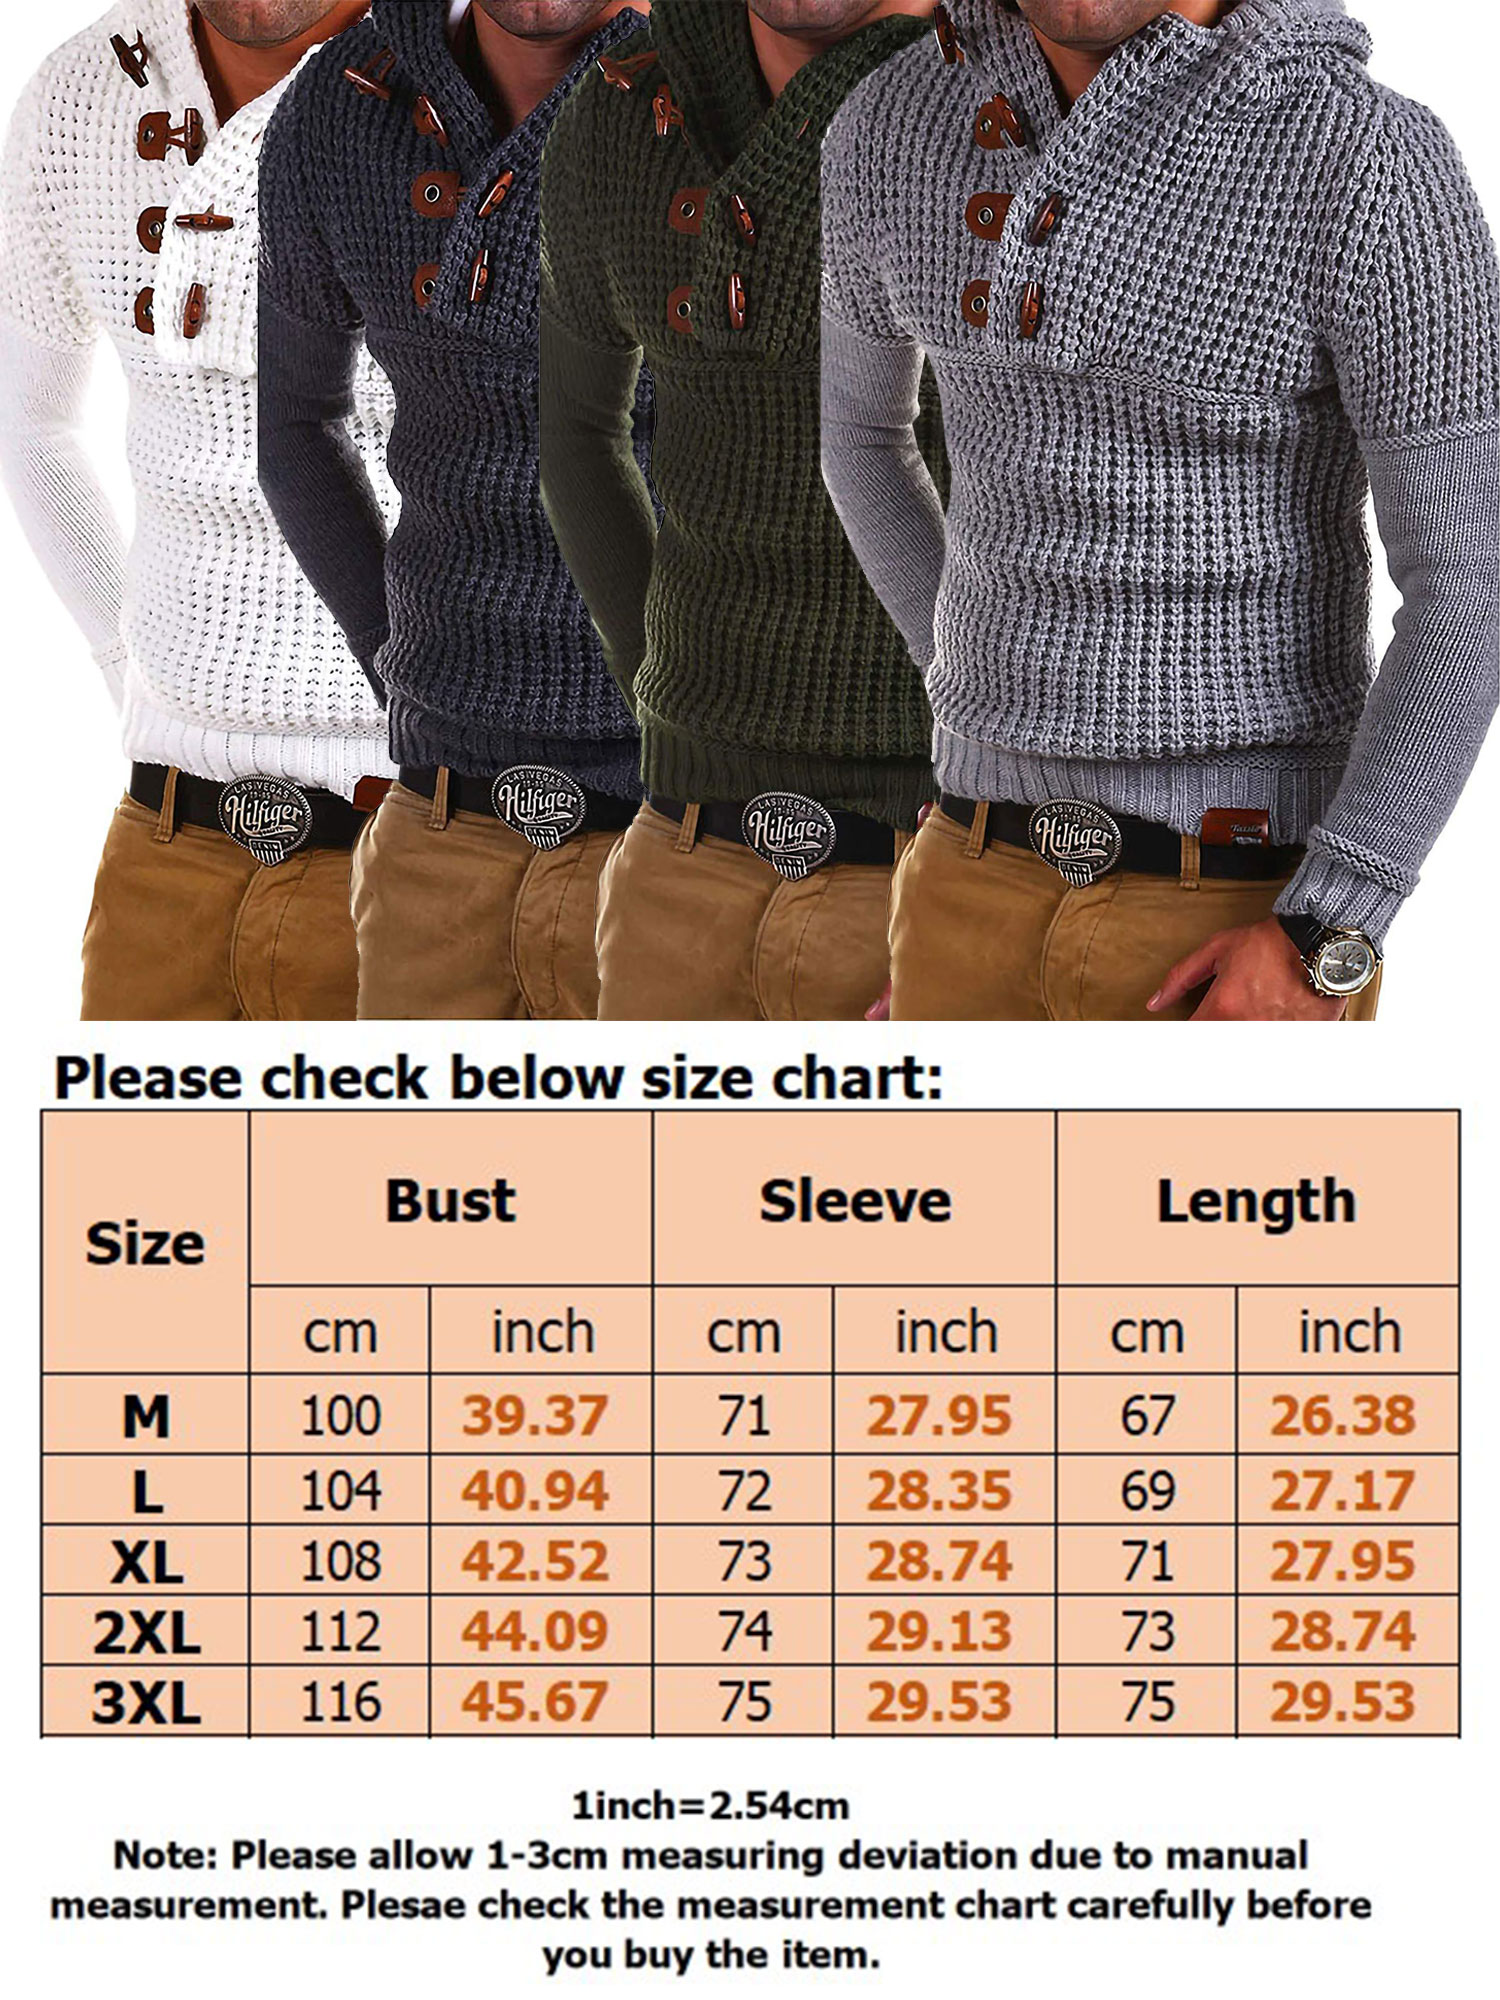 CVLIFE Fashion Plus Size Cable Knit Long Sleeve Hooded Sweater for Men Slim Fit Button Placket Sweater Jumper with Pockets - image 2 of 2